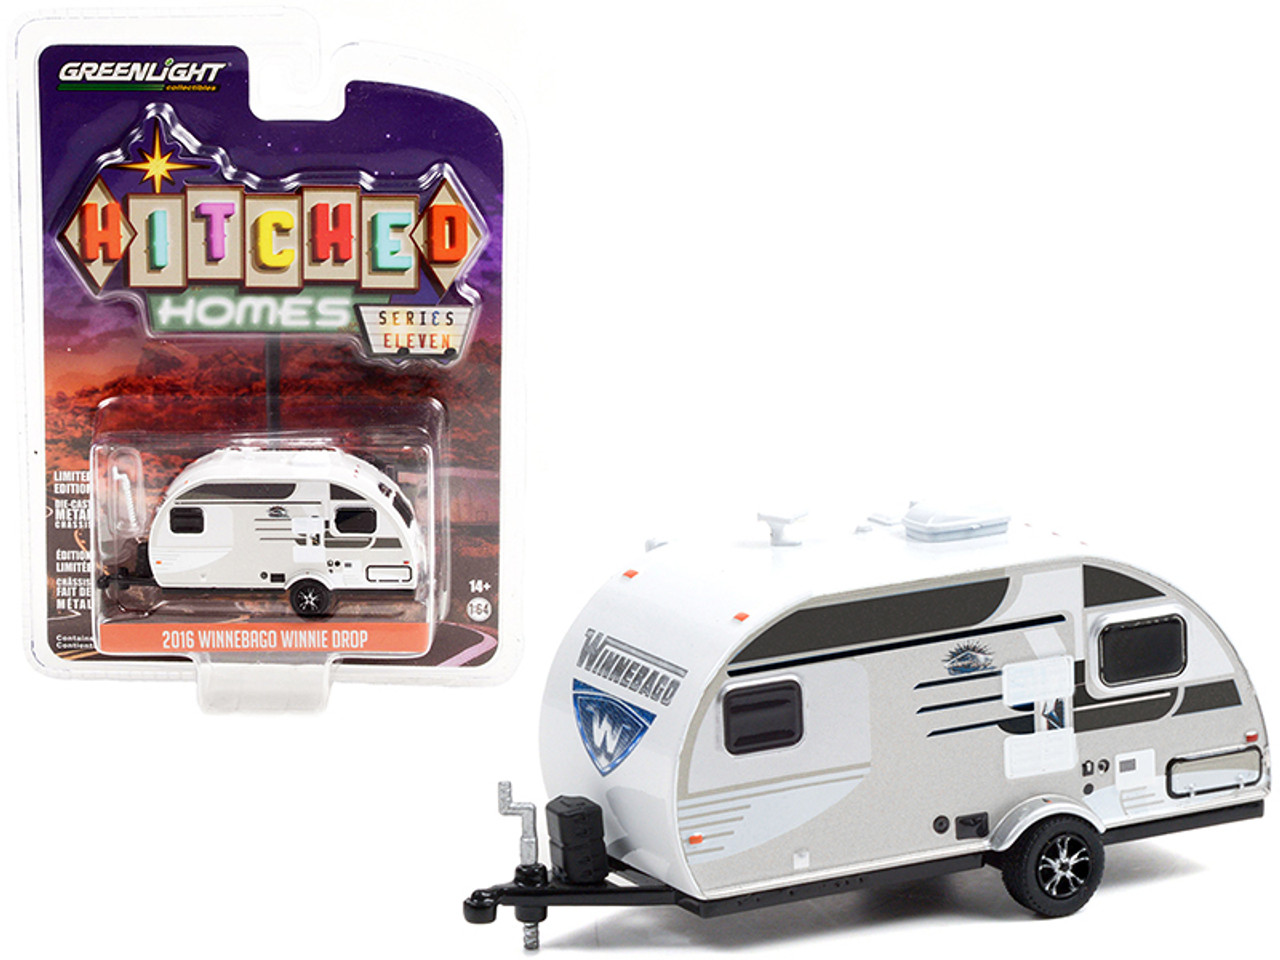 2016 Winnebago Winnie Drop Travel Trailer Platinum and White with Graphics "Hitched Homes" Series 11 1/64 Diecast Model by Greenlight